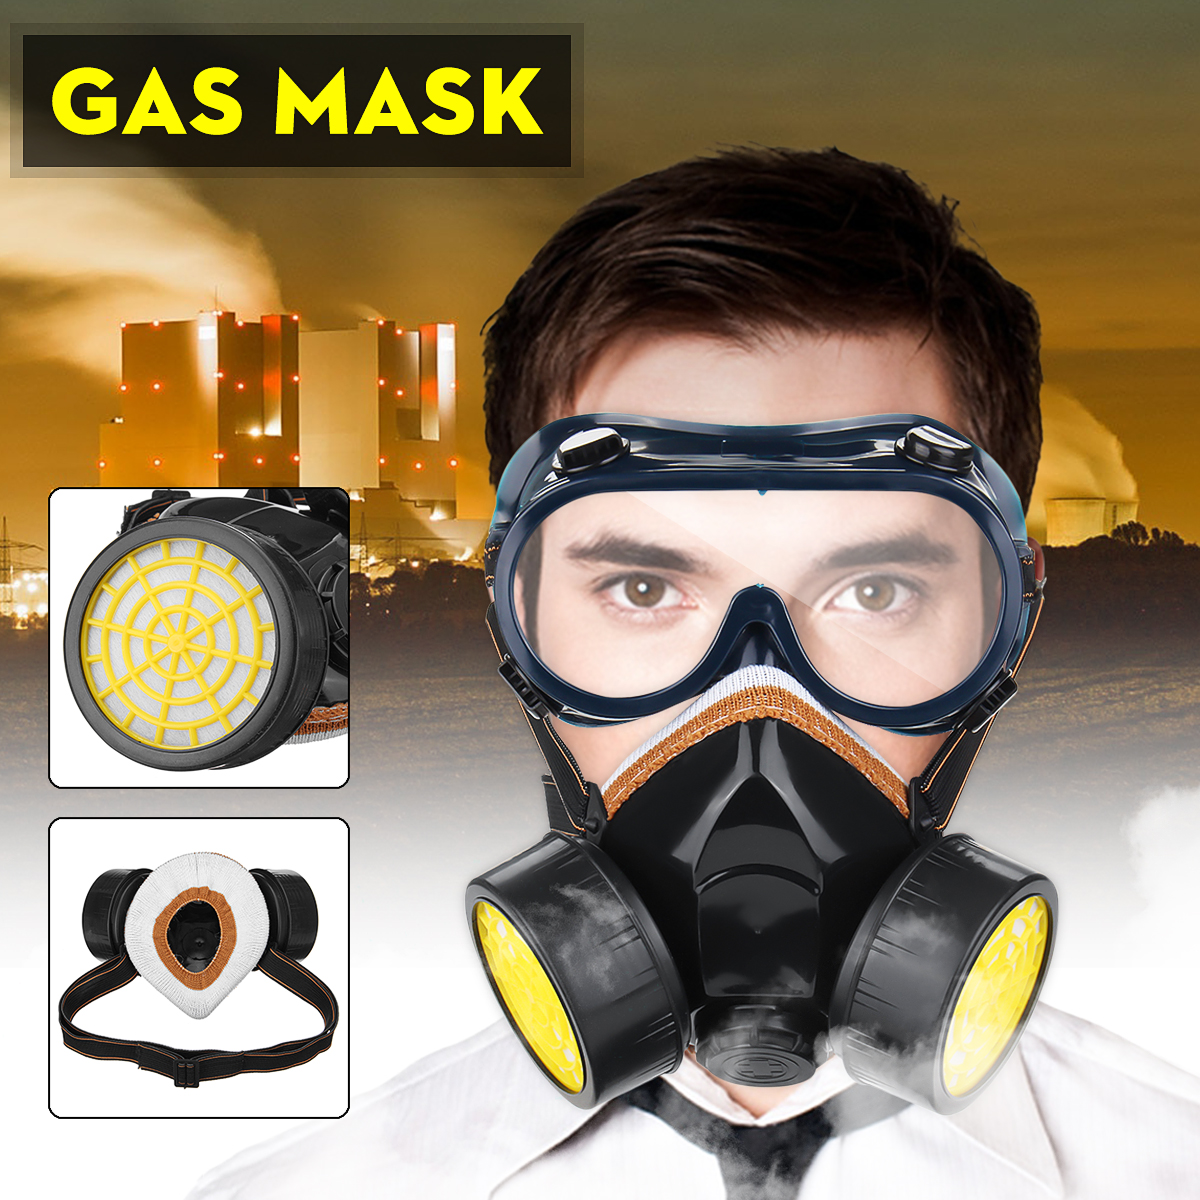 Gas-Mask-Protection-Filter-Chemical-Respirator-Safety-Dust-Mask-Paint-Spray-Pesticide-Anti-Dust-Resp-1549268-8